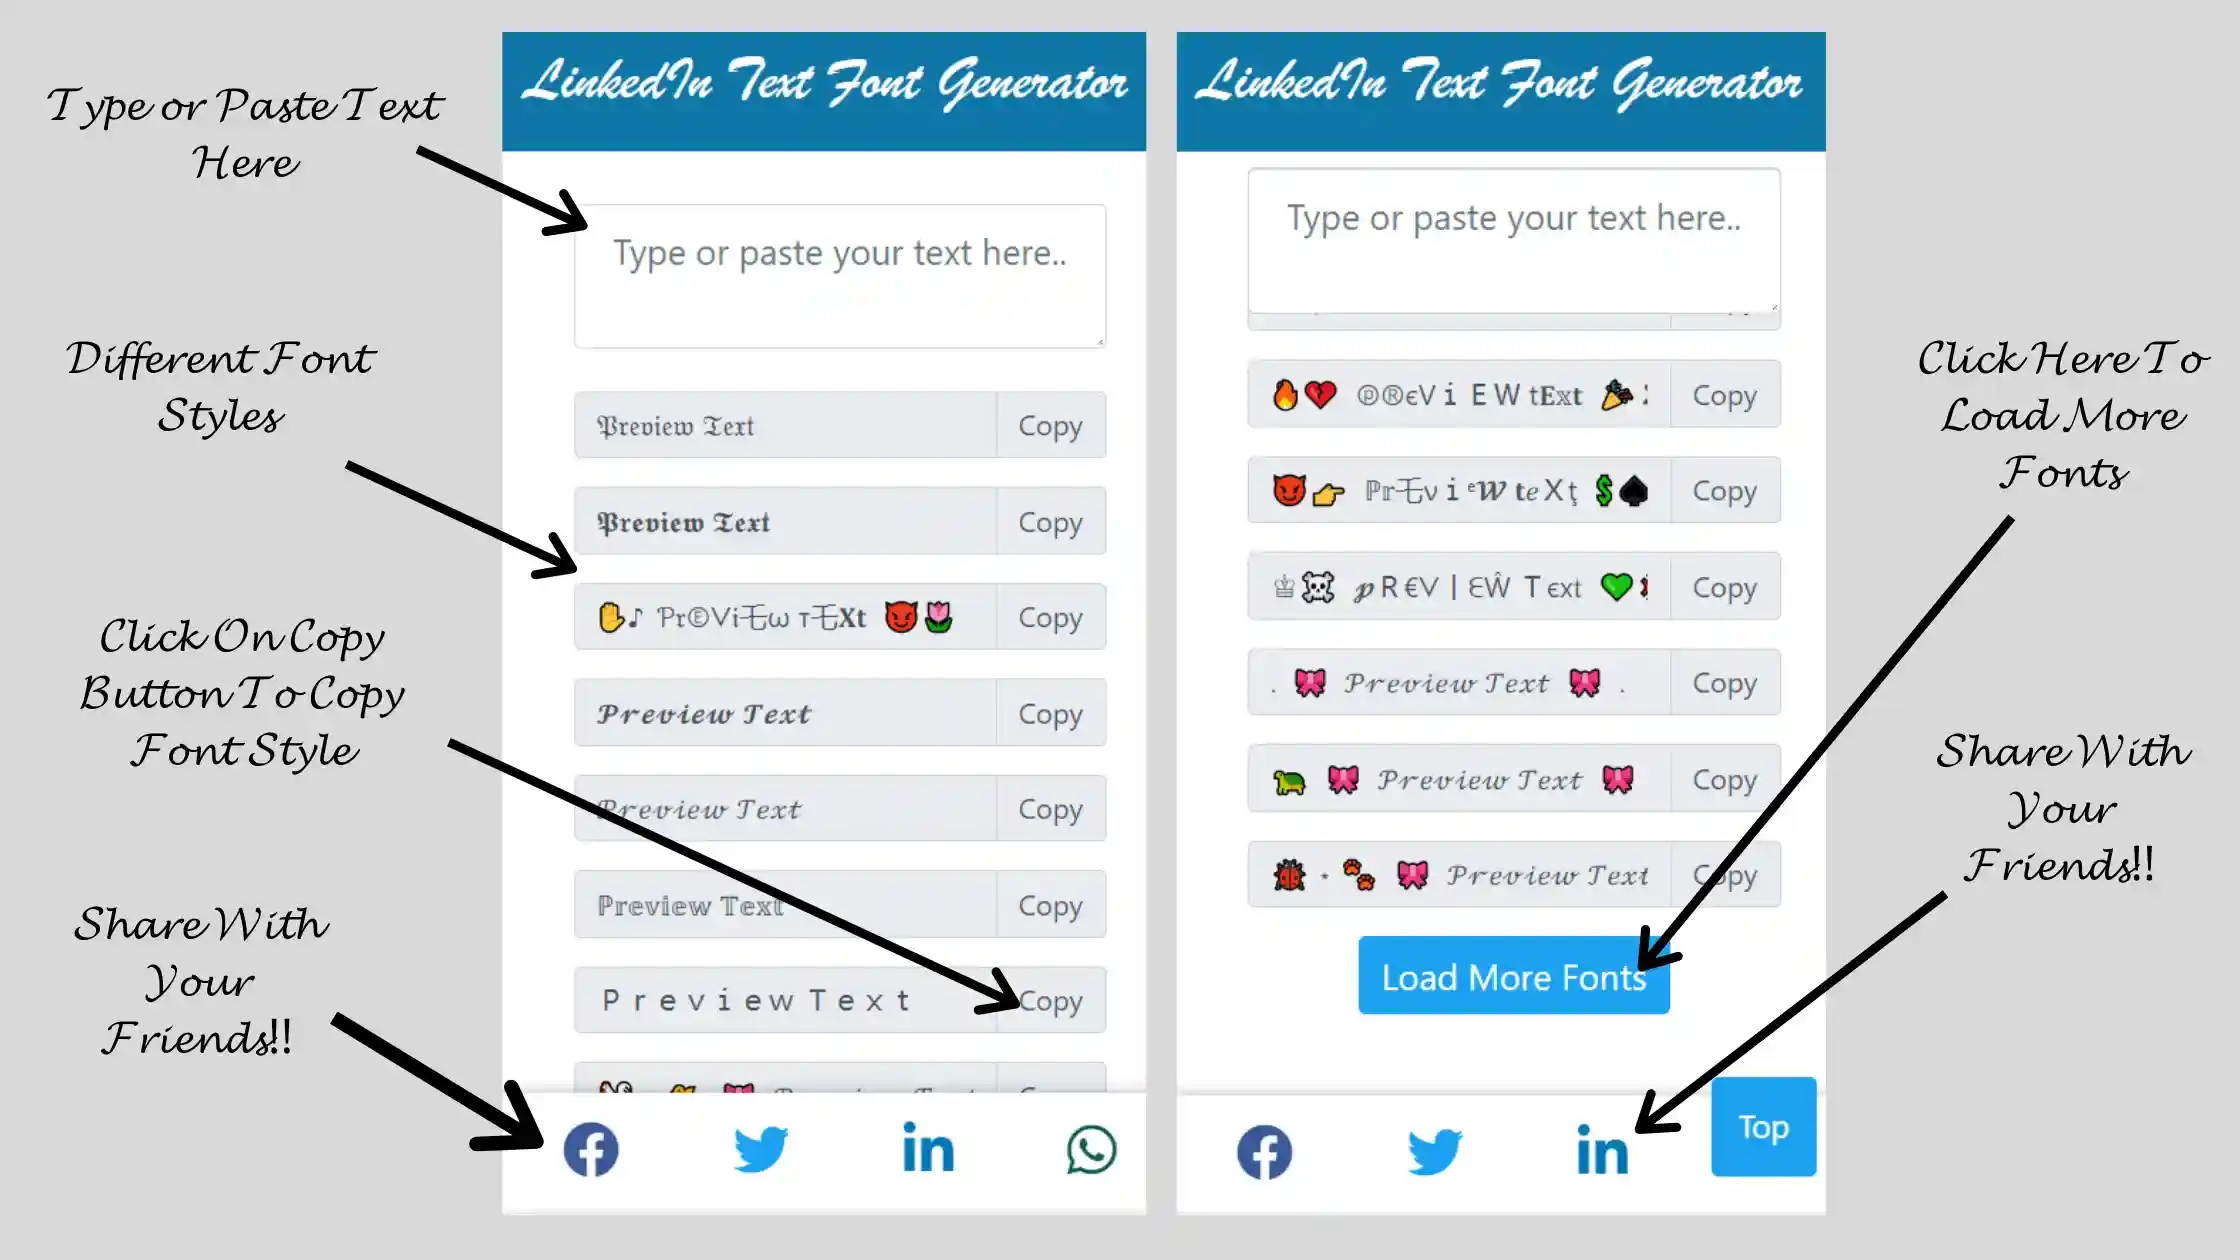 how to use linkedin font generator